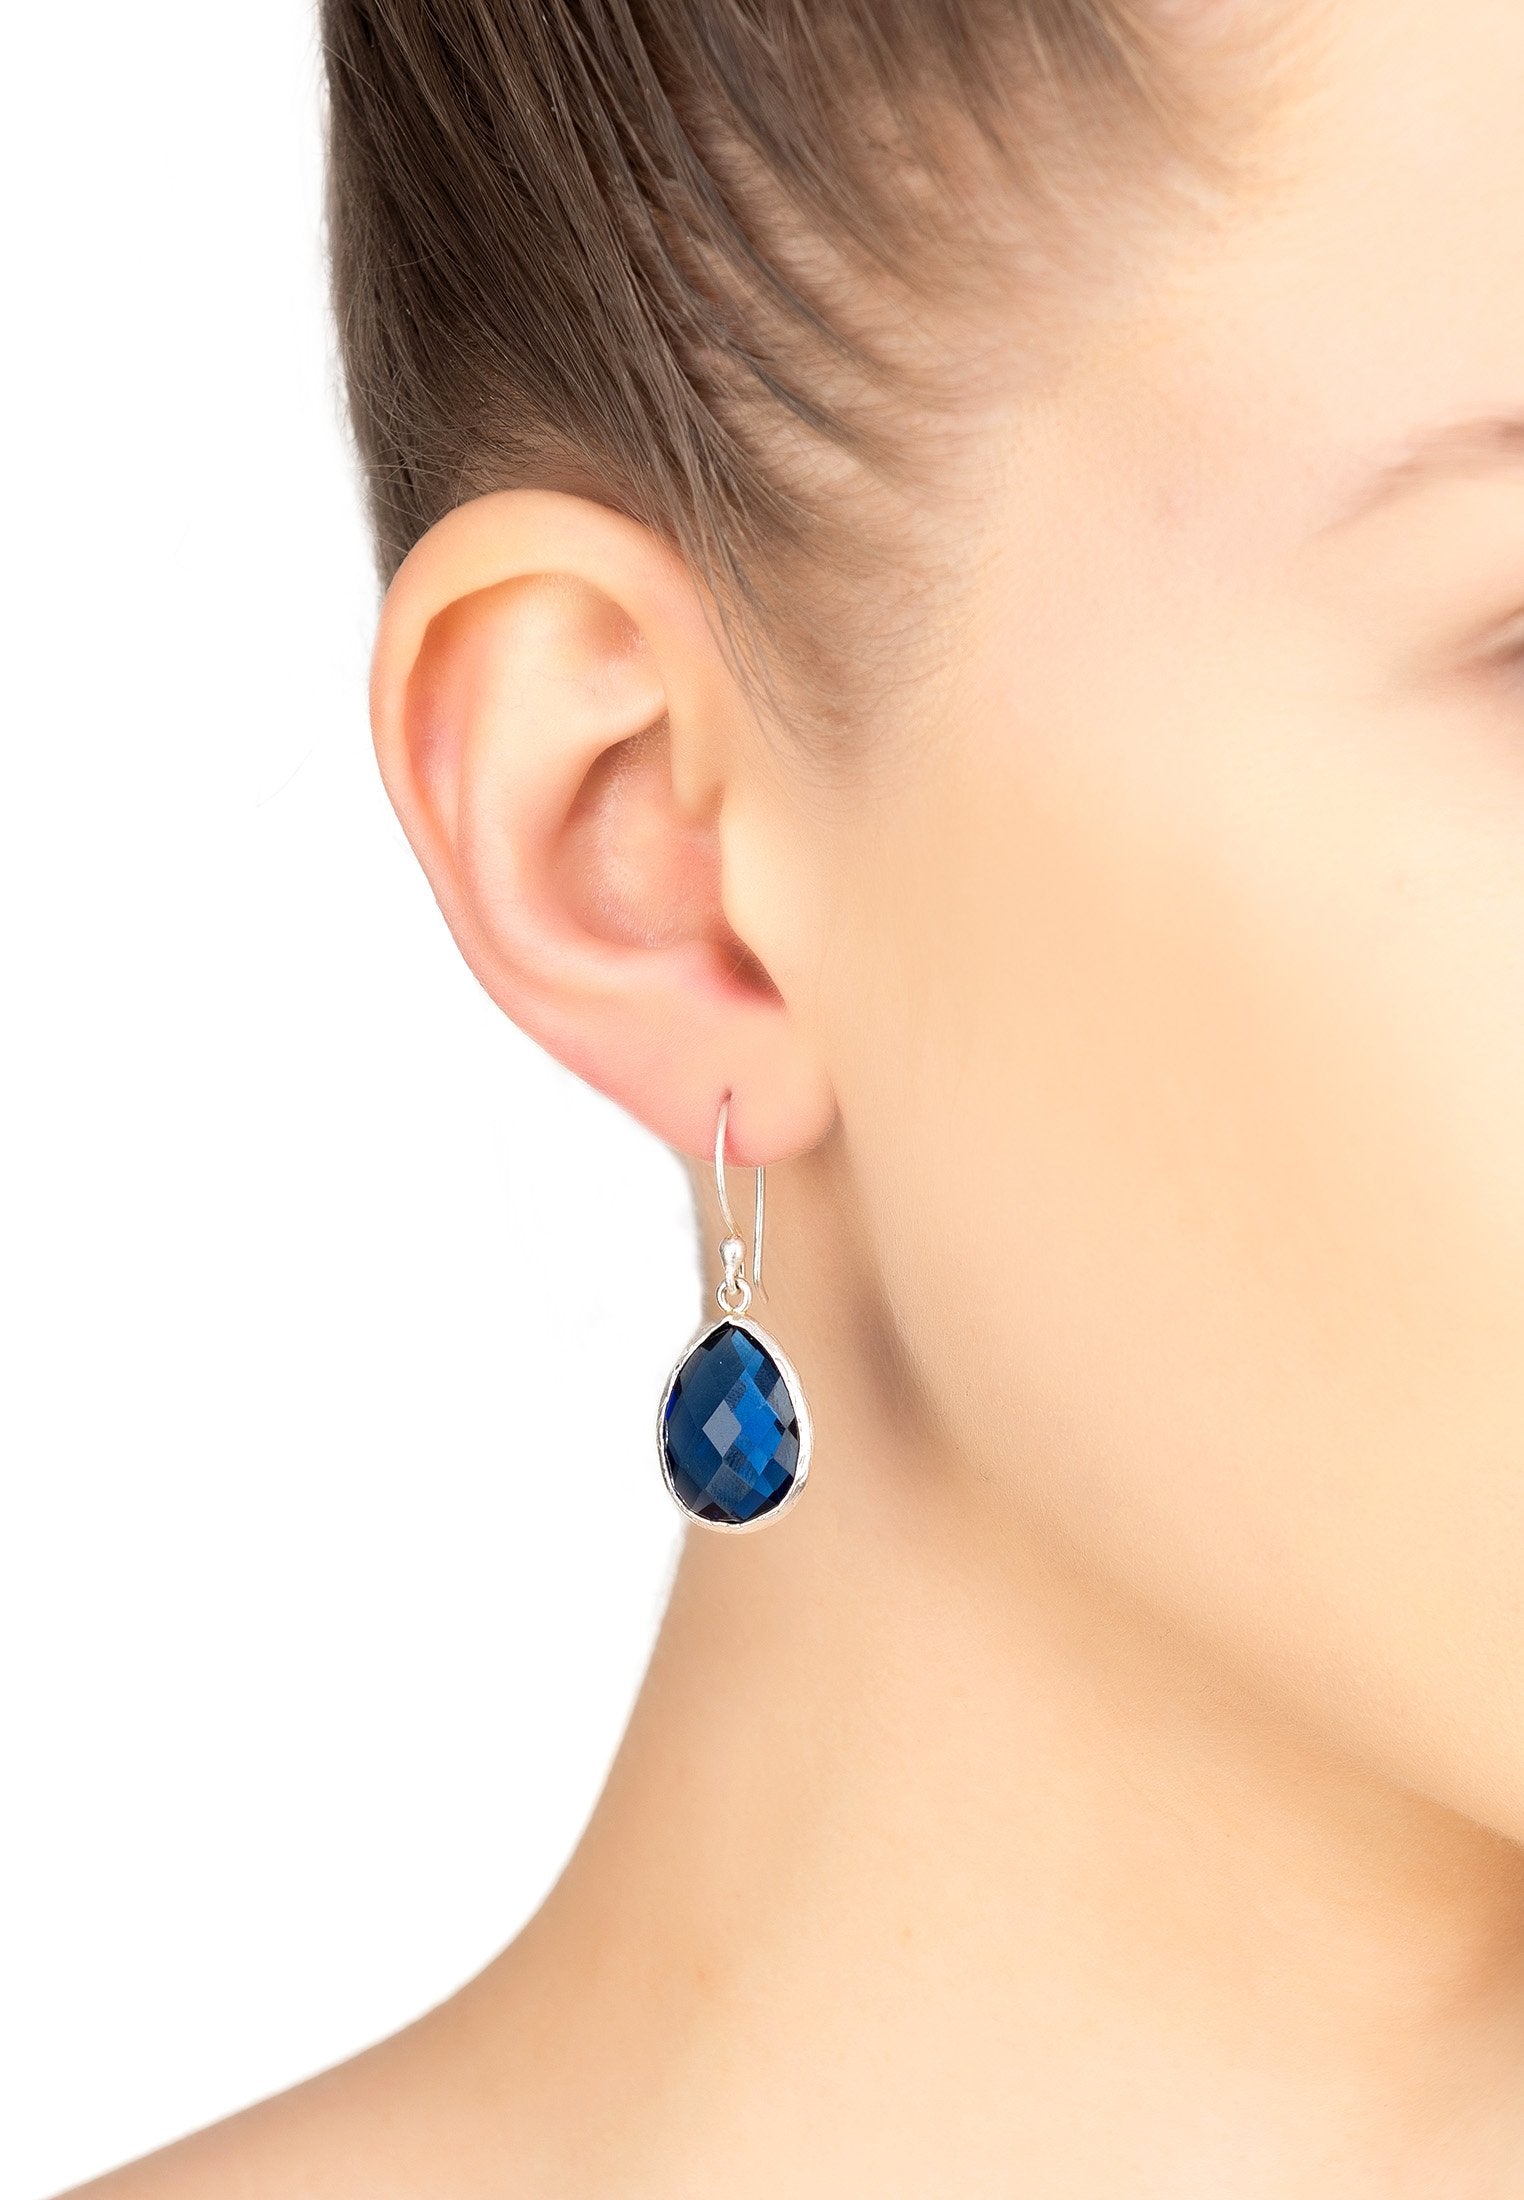 Petite Sapphire Hydro Silver Drop Earrings - Classic French Hook Design for All Occasions - Jewelry & Watches - Bijou Her -  -  - 